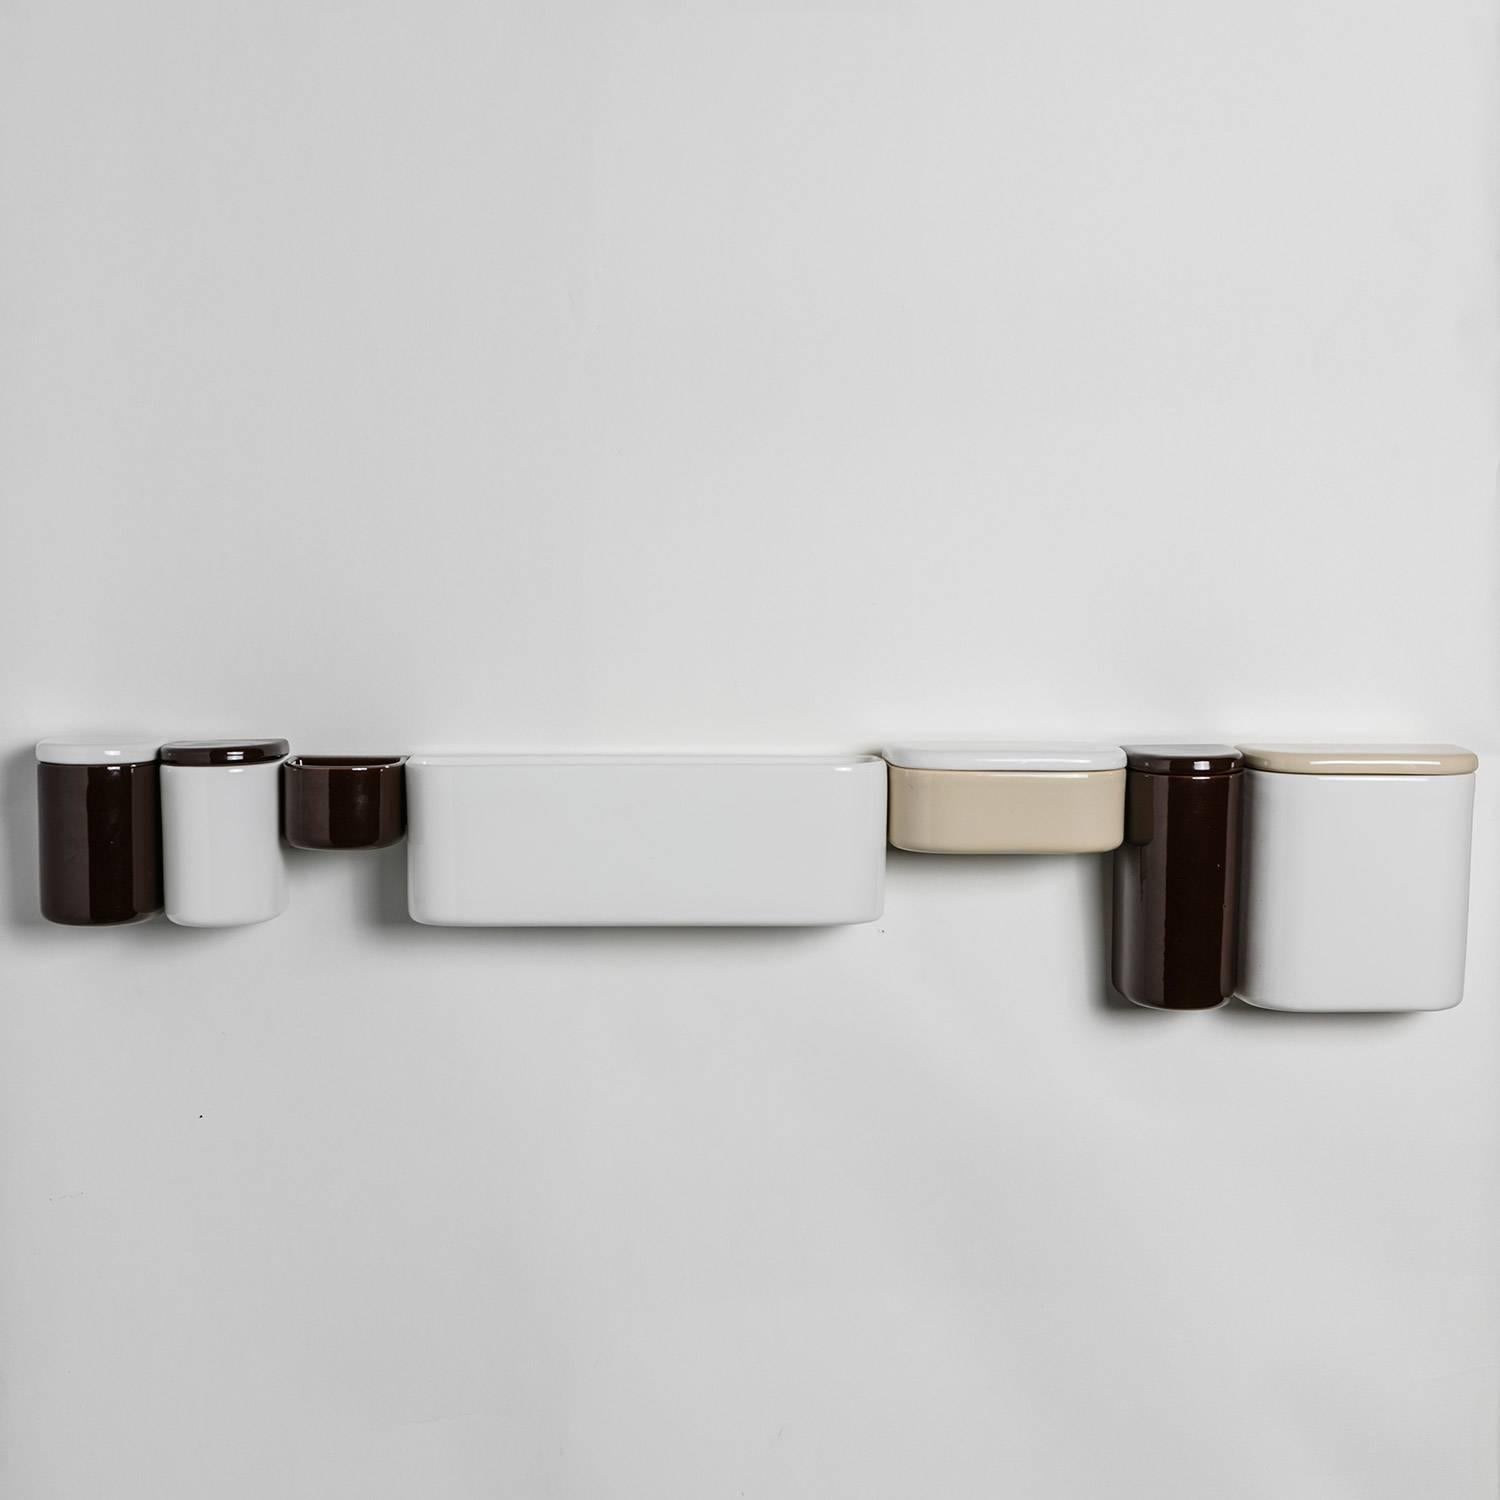 Adjustable ceramic wall units by Sicart, Italy.
Enameled ceramic boxes freely positioned along the metal bar on the wall.
Three different heights and widths, white, black, red and brown colors
available.